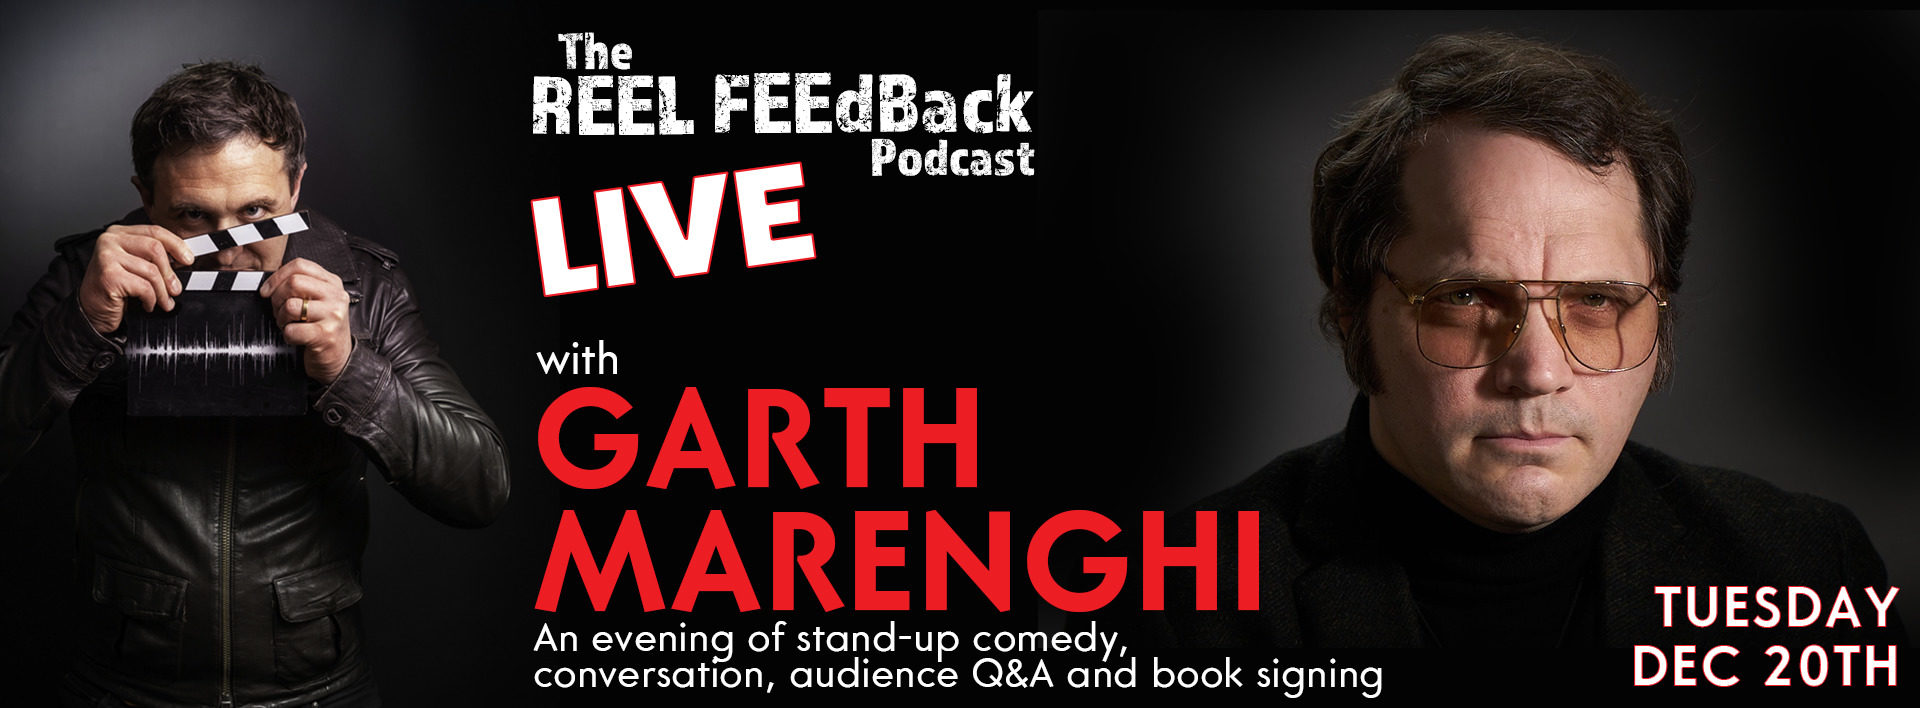 The Reel Feedback Podcast Live with Garth Marenghi